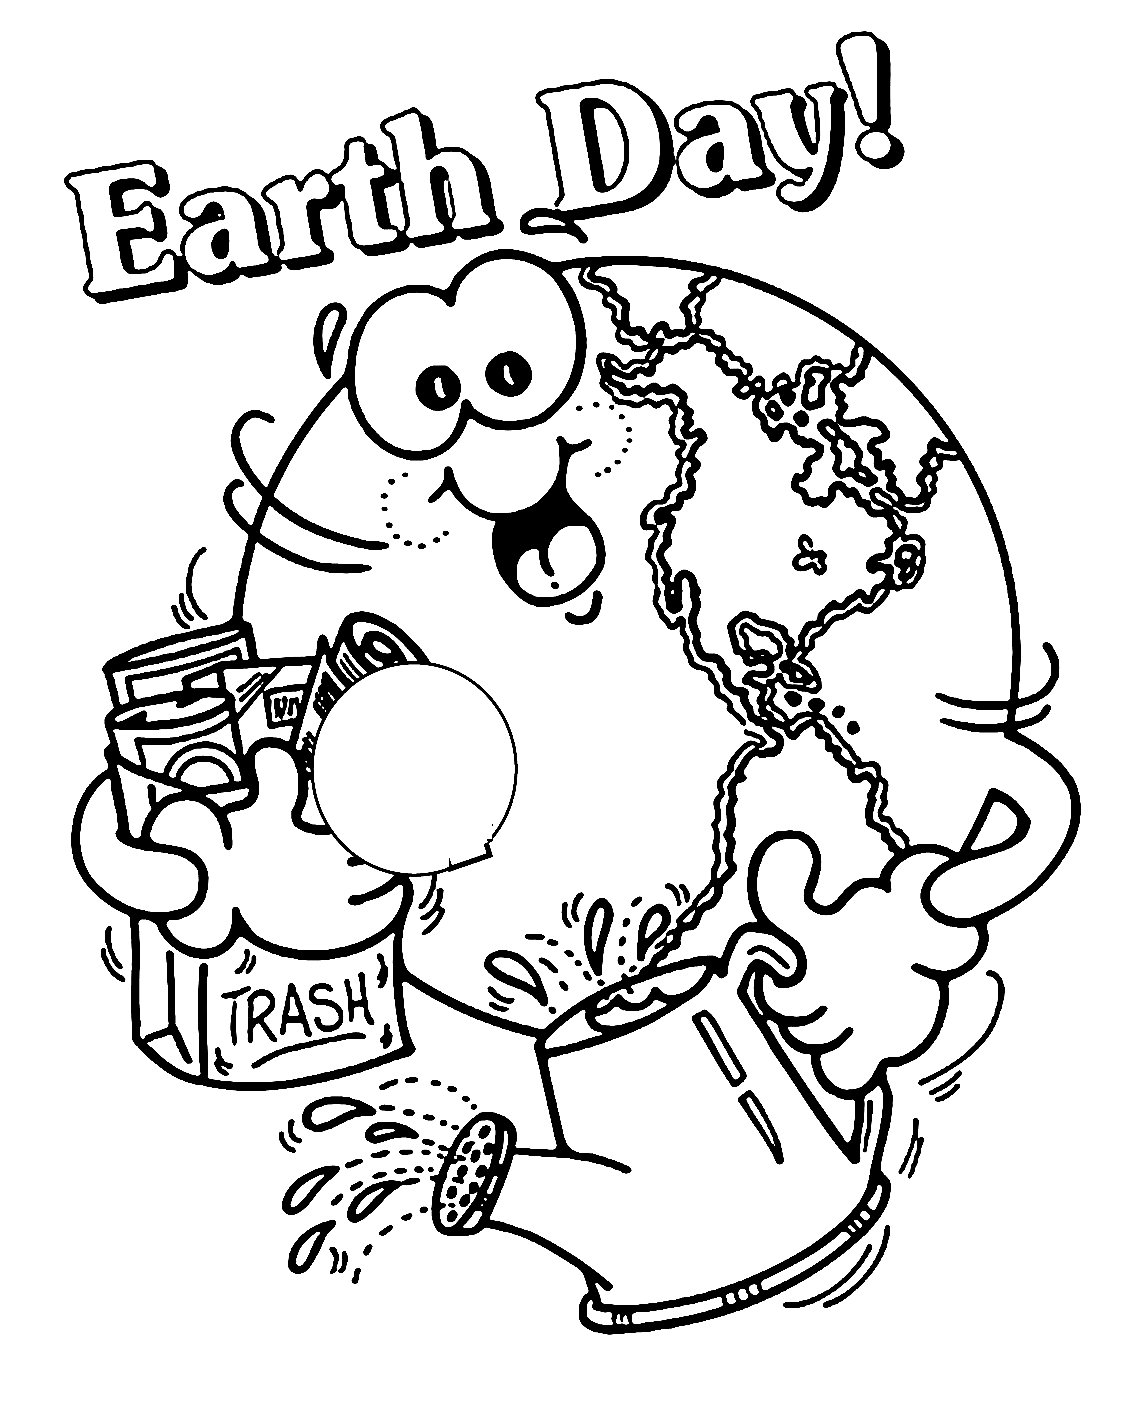 Happy Earth - Earth Day Coloring Pages - Earth Day Coloring Pages